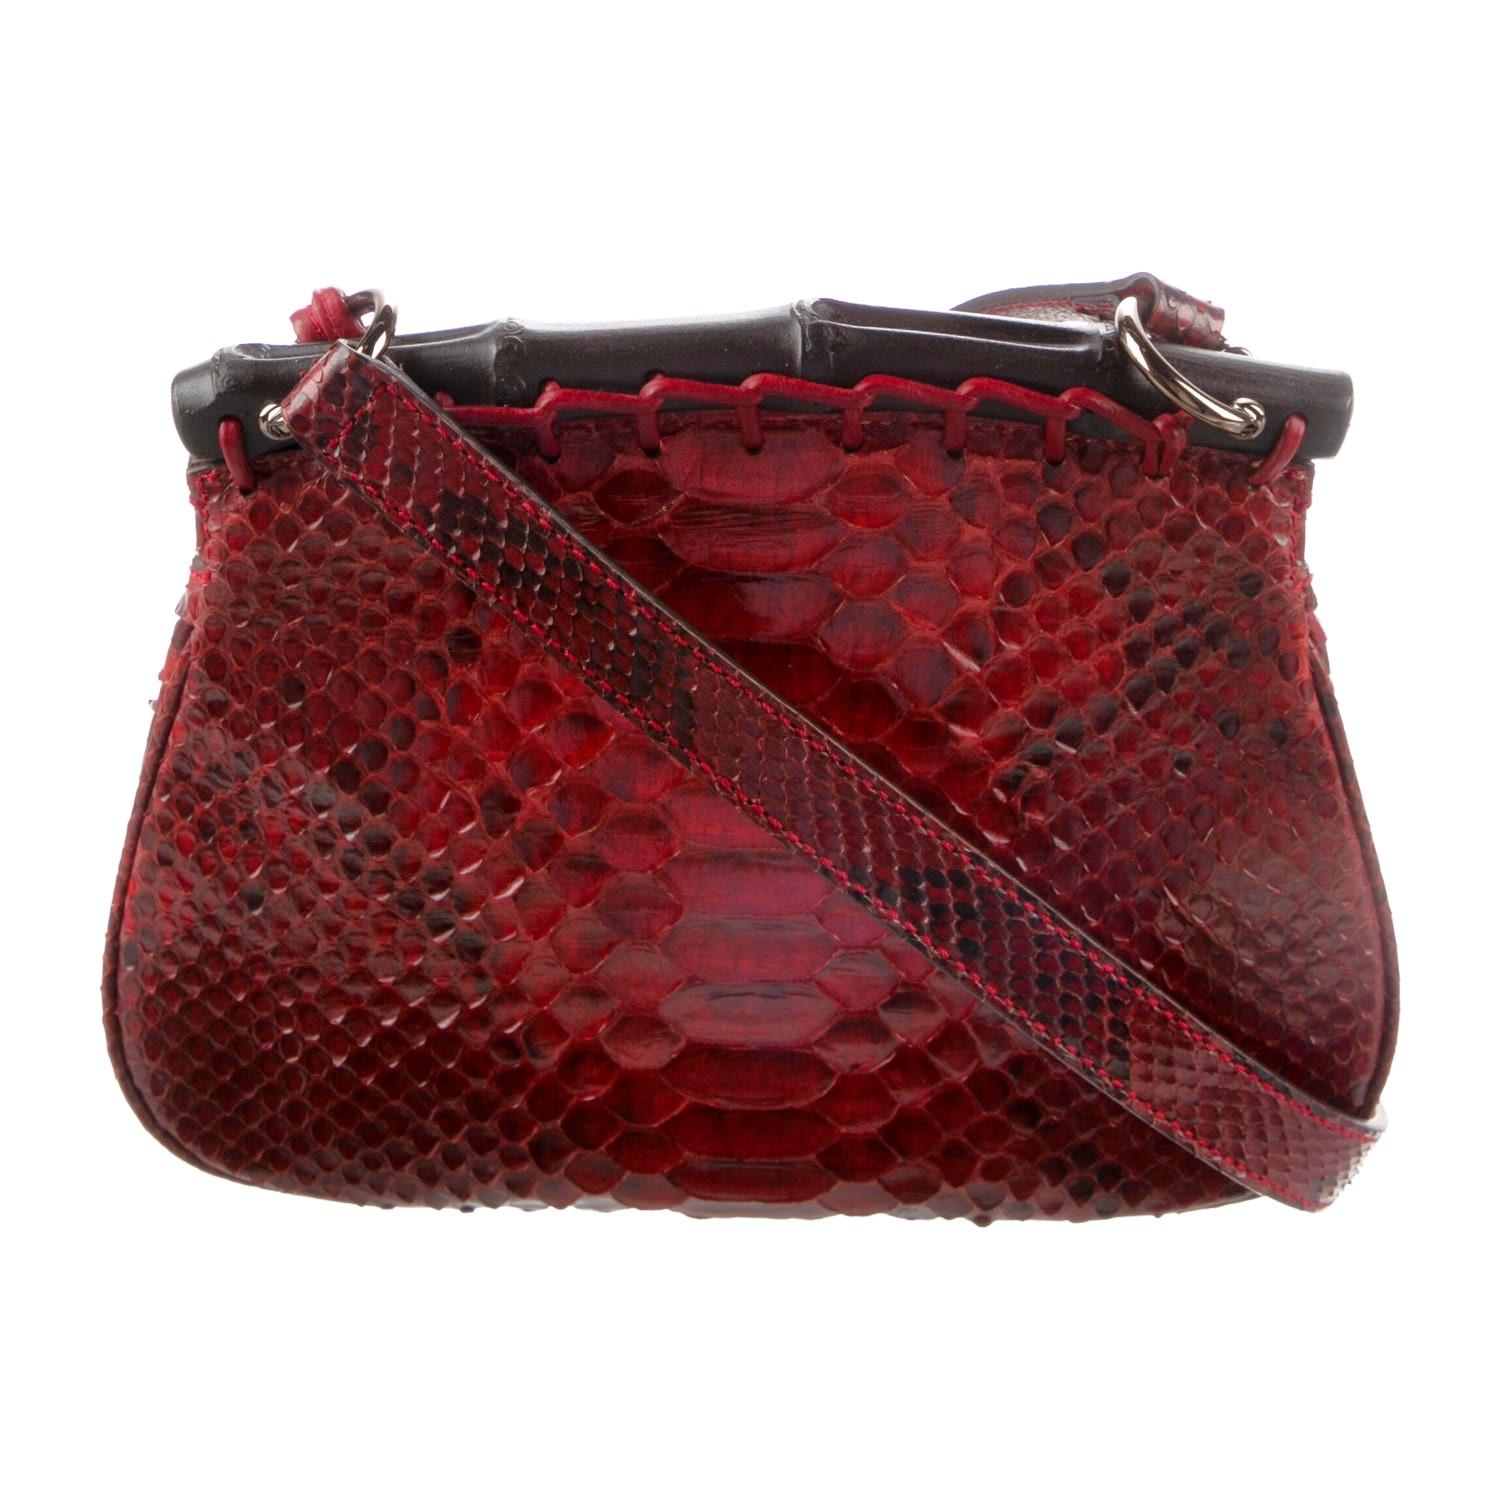 New Gucci Nouveau Python Fringe Bamboo Runway Bag in Red $3100 For Sale 2